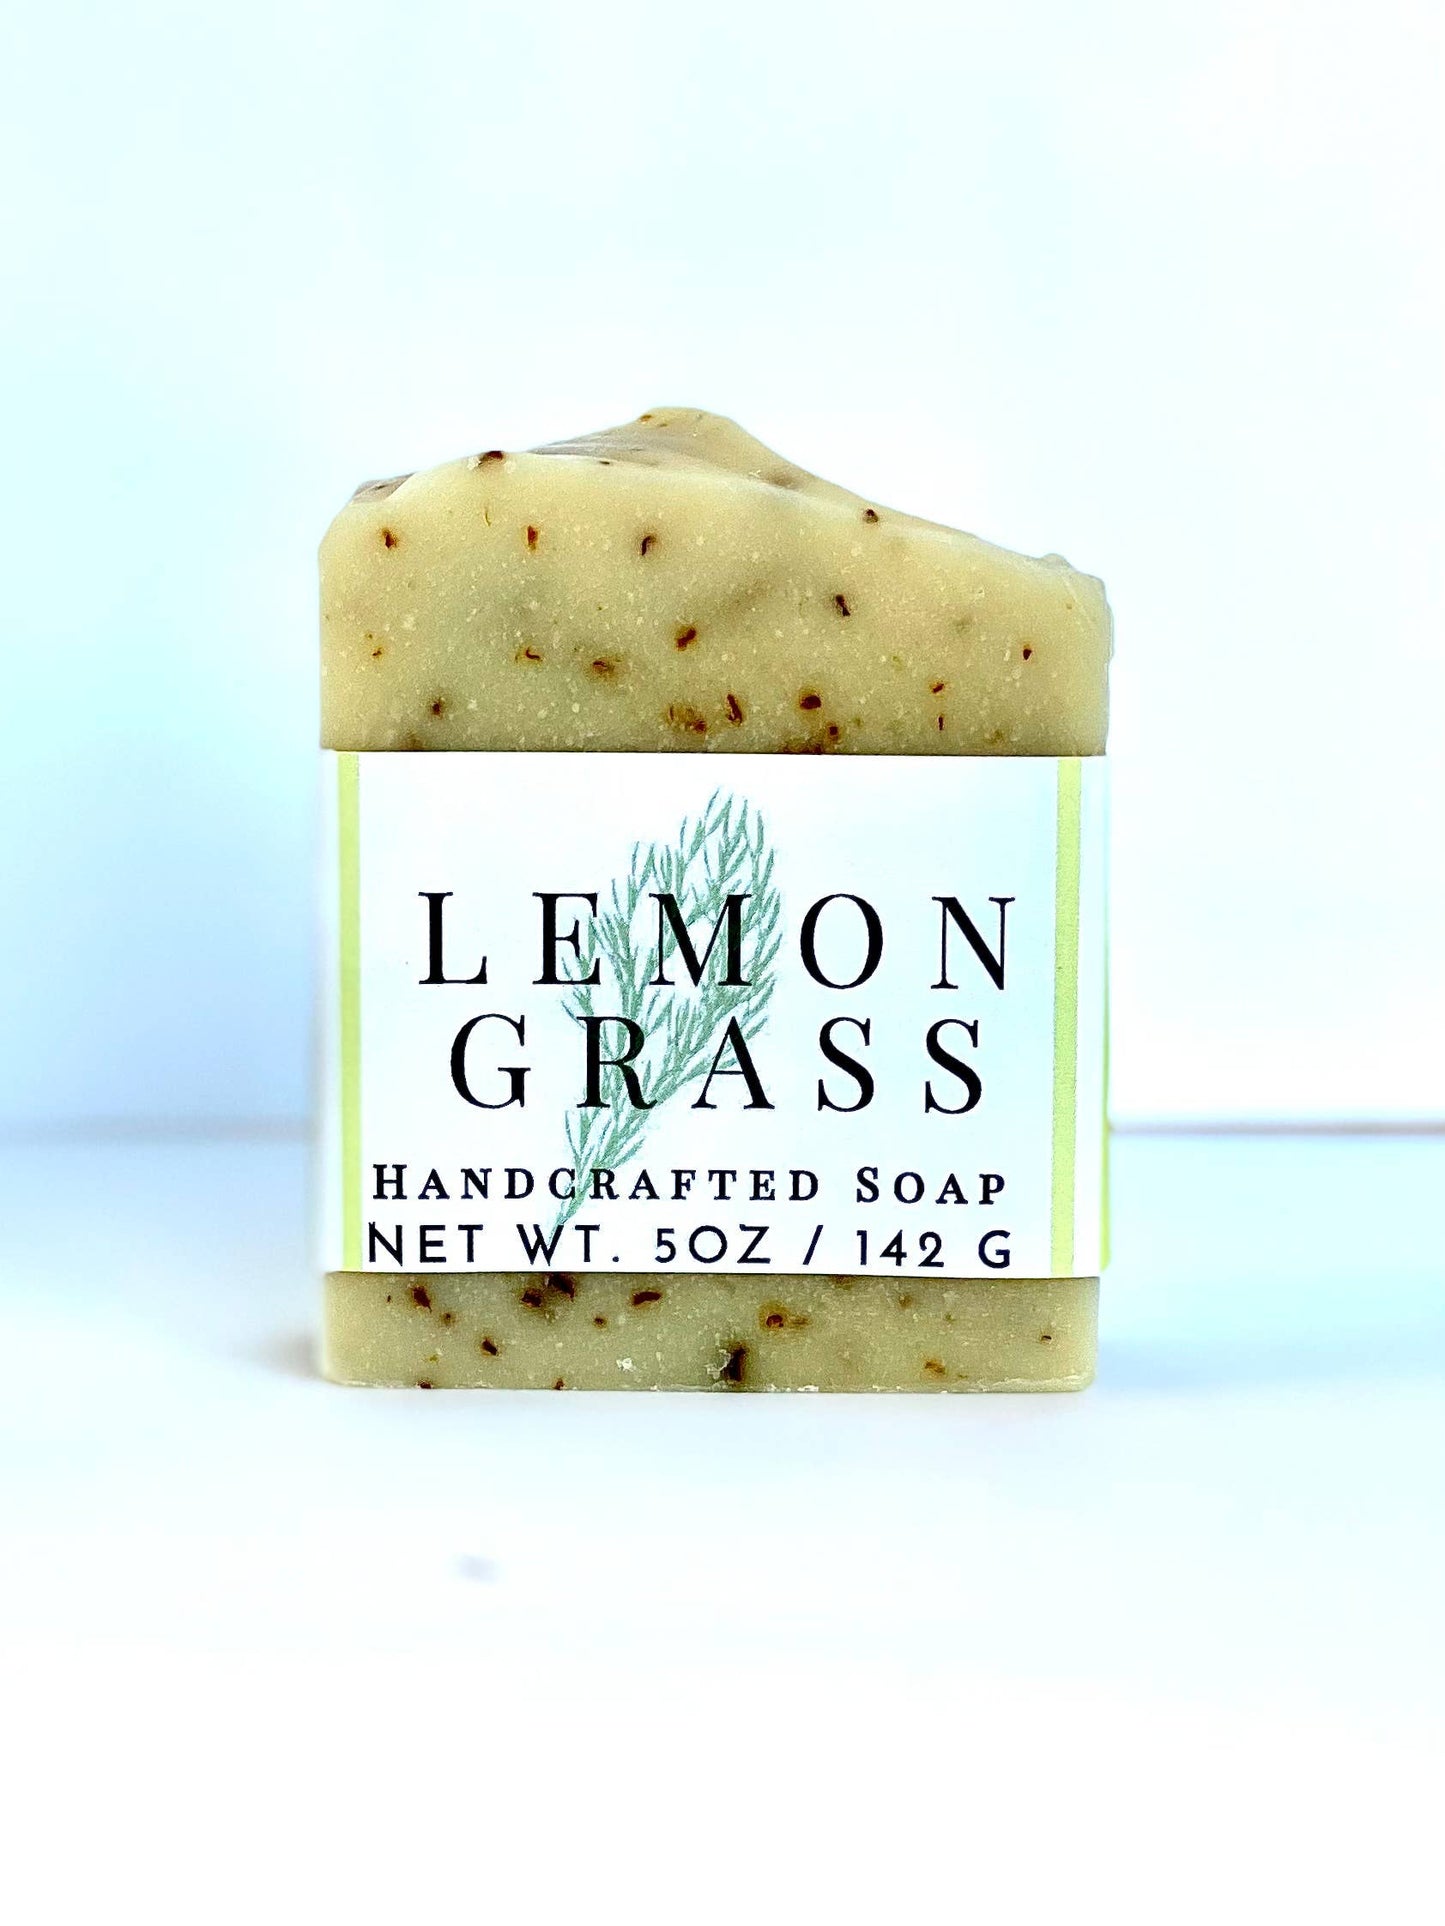 5 oz Lemongrass Handcrafted Soap - Pluff Mud Mercantile